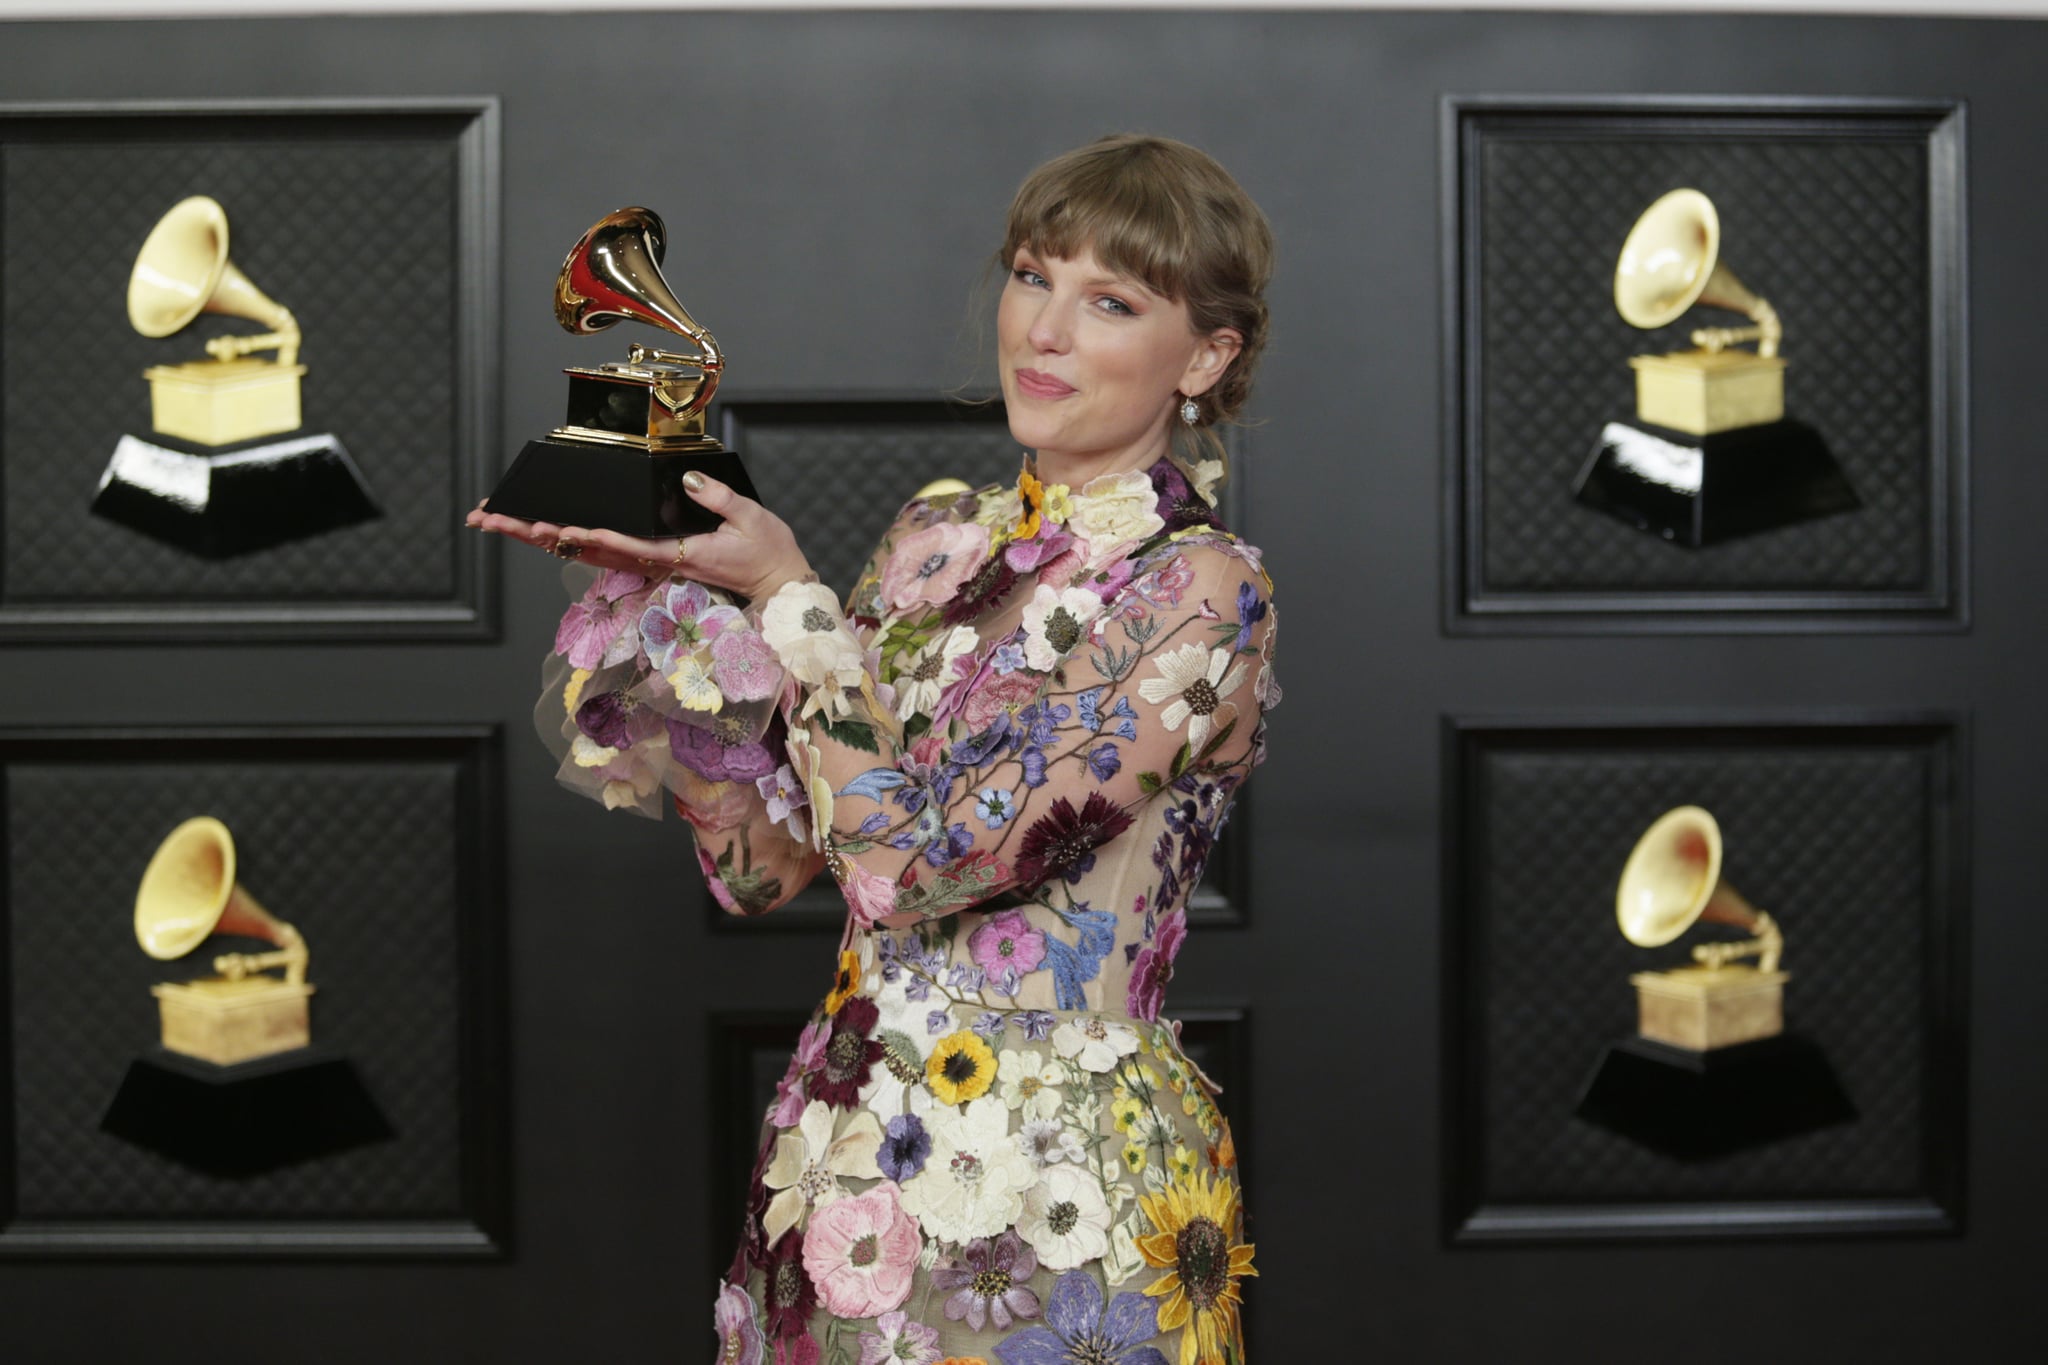 LOS ANGELES - MARCH 14: Taylor Swift at THE 63rd ANNUAL GRAMMY® AWARDS, broadcast live from the STAPLES Center in Los Angeles, Sunday, March 14, 2021 (8:00-11:30 PM, live ET/5:00-8:30 PM, live PT) on the CBS Television Network and Paramount+. (Photo by Francis Specker/CBS via Getty Images)